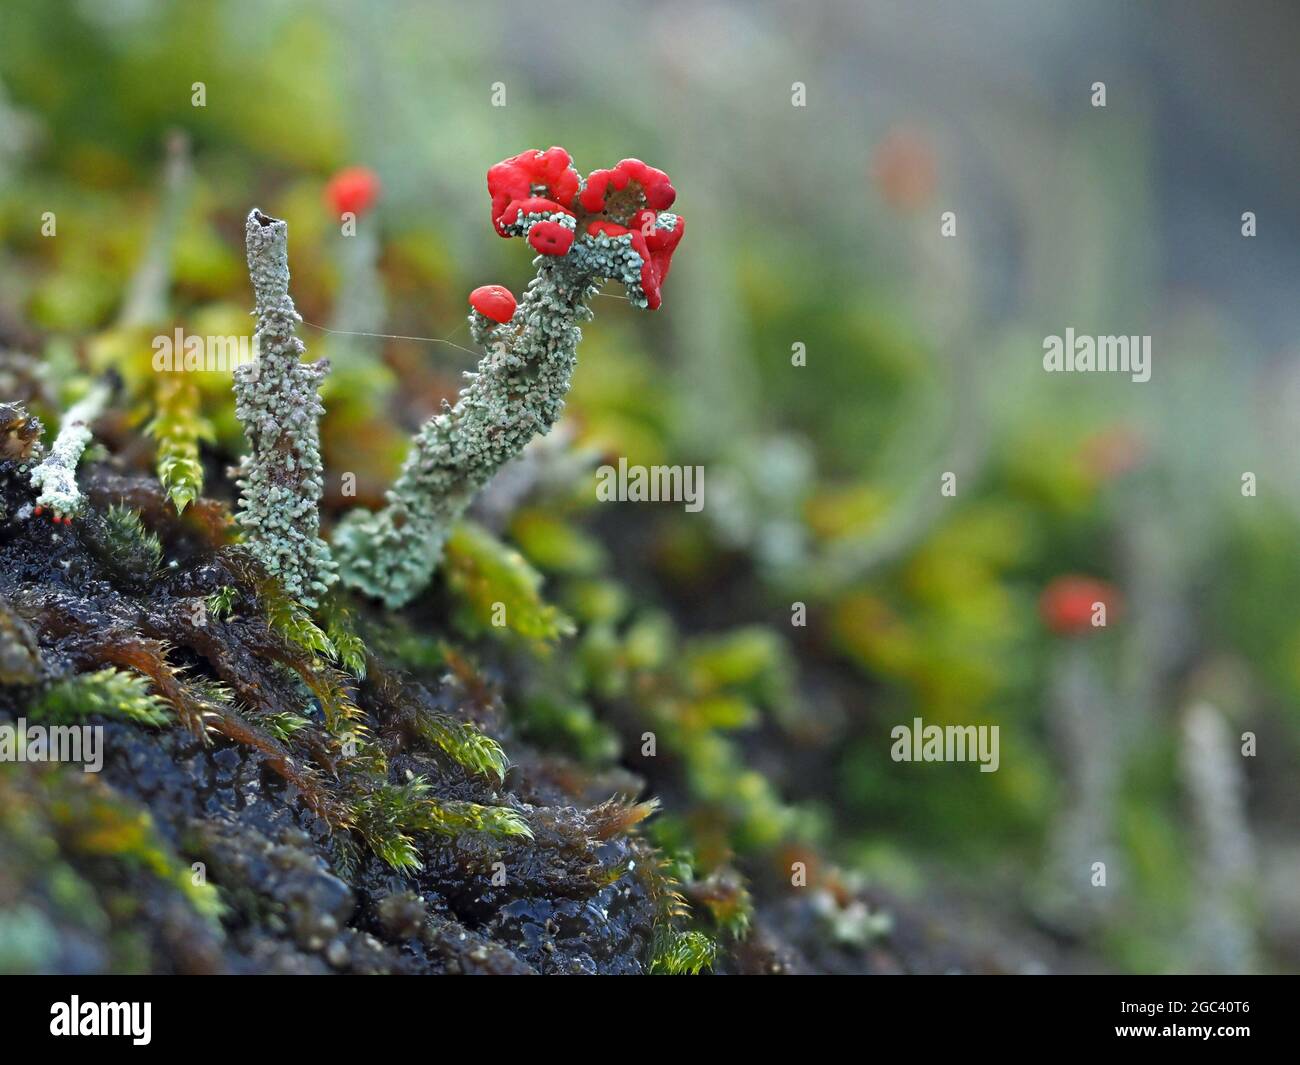 tiny world - fantastic red fruiting bodies of Cladonia cristatella – British soldiers lichen on grey frilly stalks with small stems of green moss Stock Photo